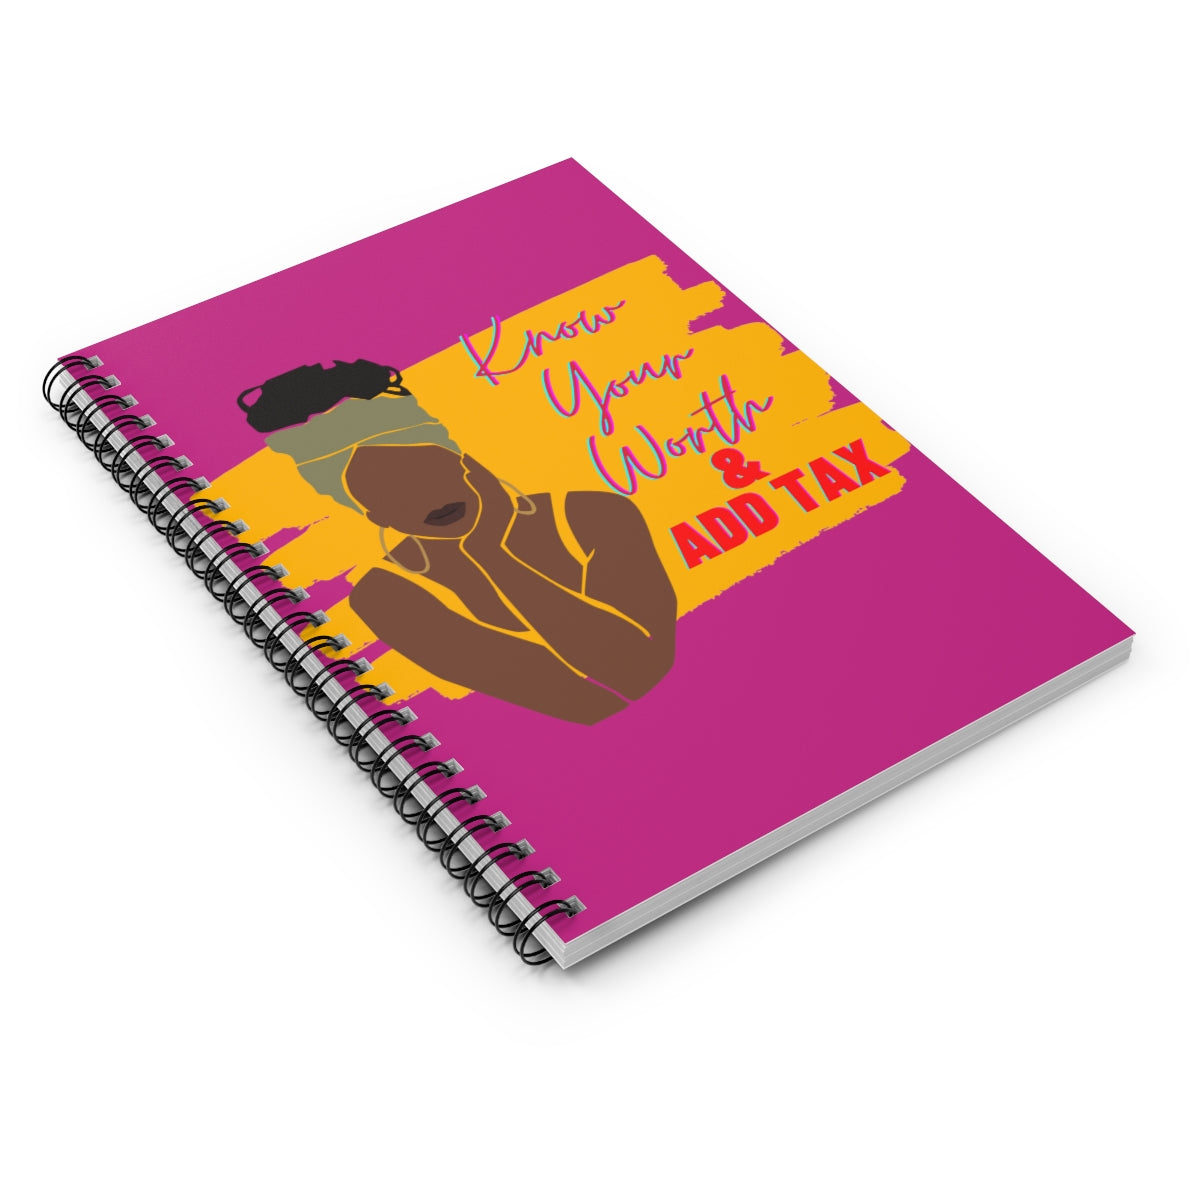 Know Your Worth & Add Tax Pink Spiral Notebook - Ruled Line